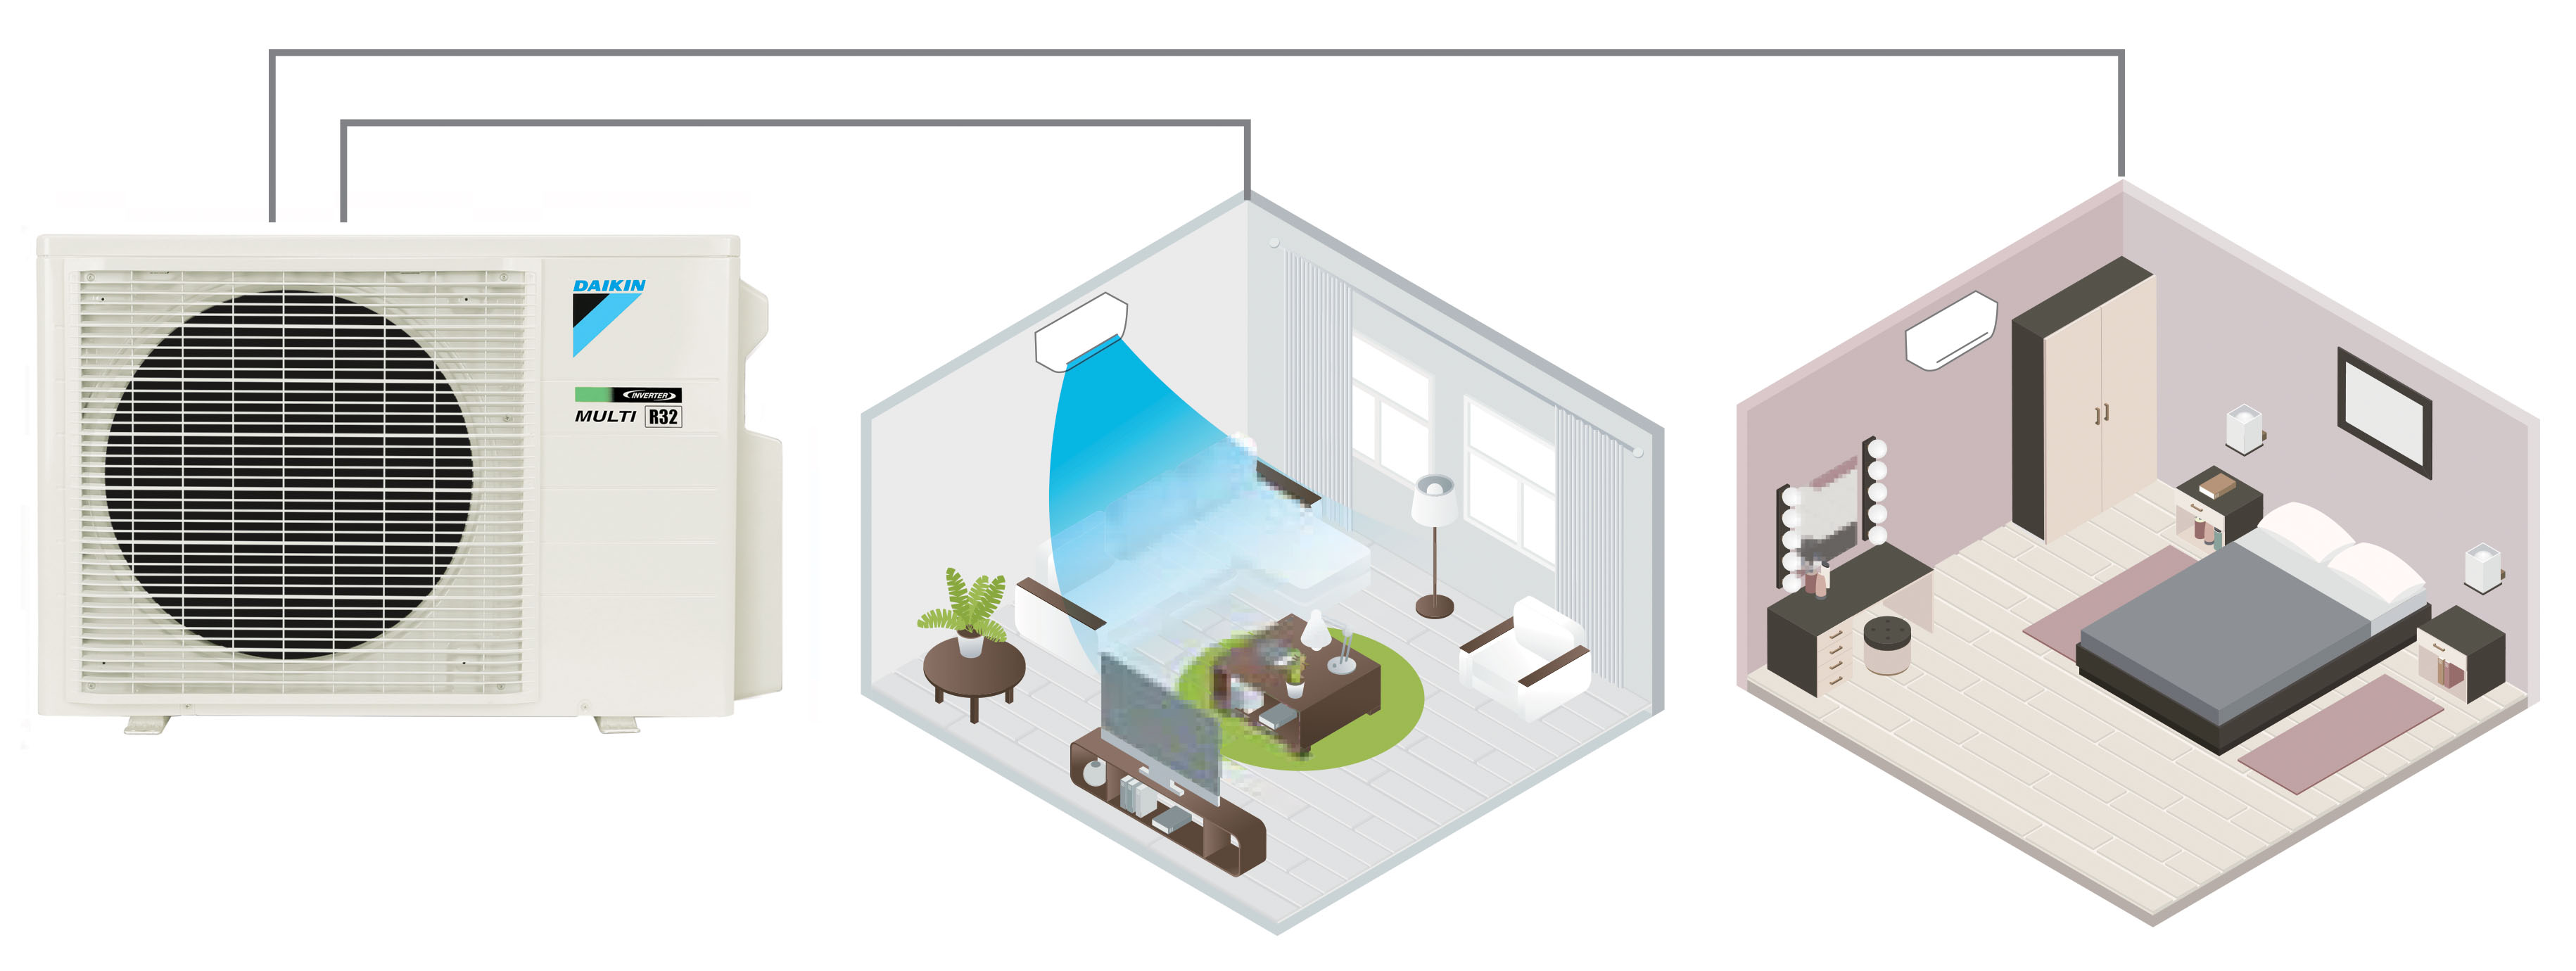 What Are The Primary Benefits Of A Multi-Head Split System - Tailored Heating and Cooling